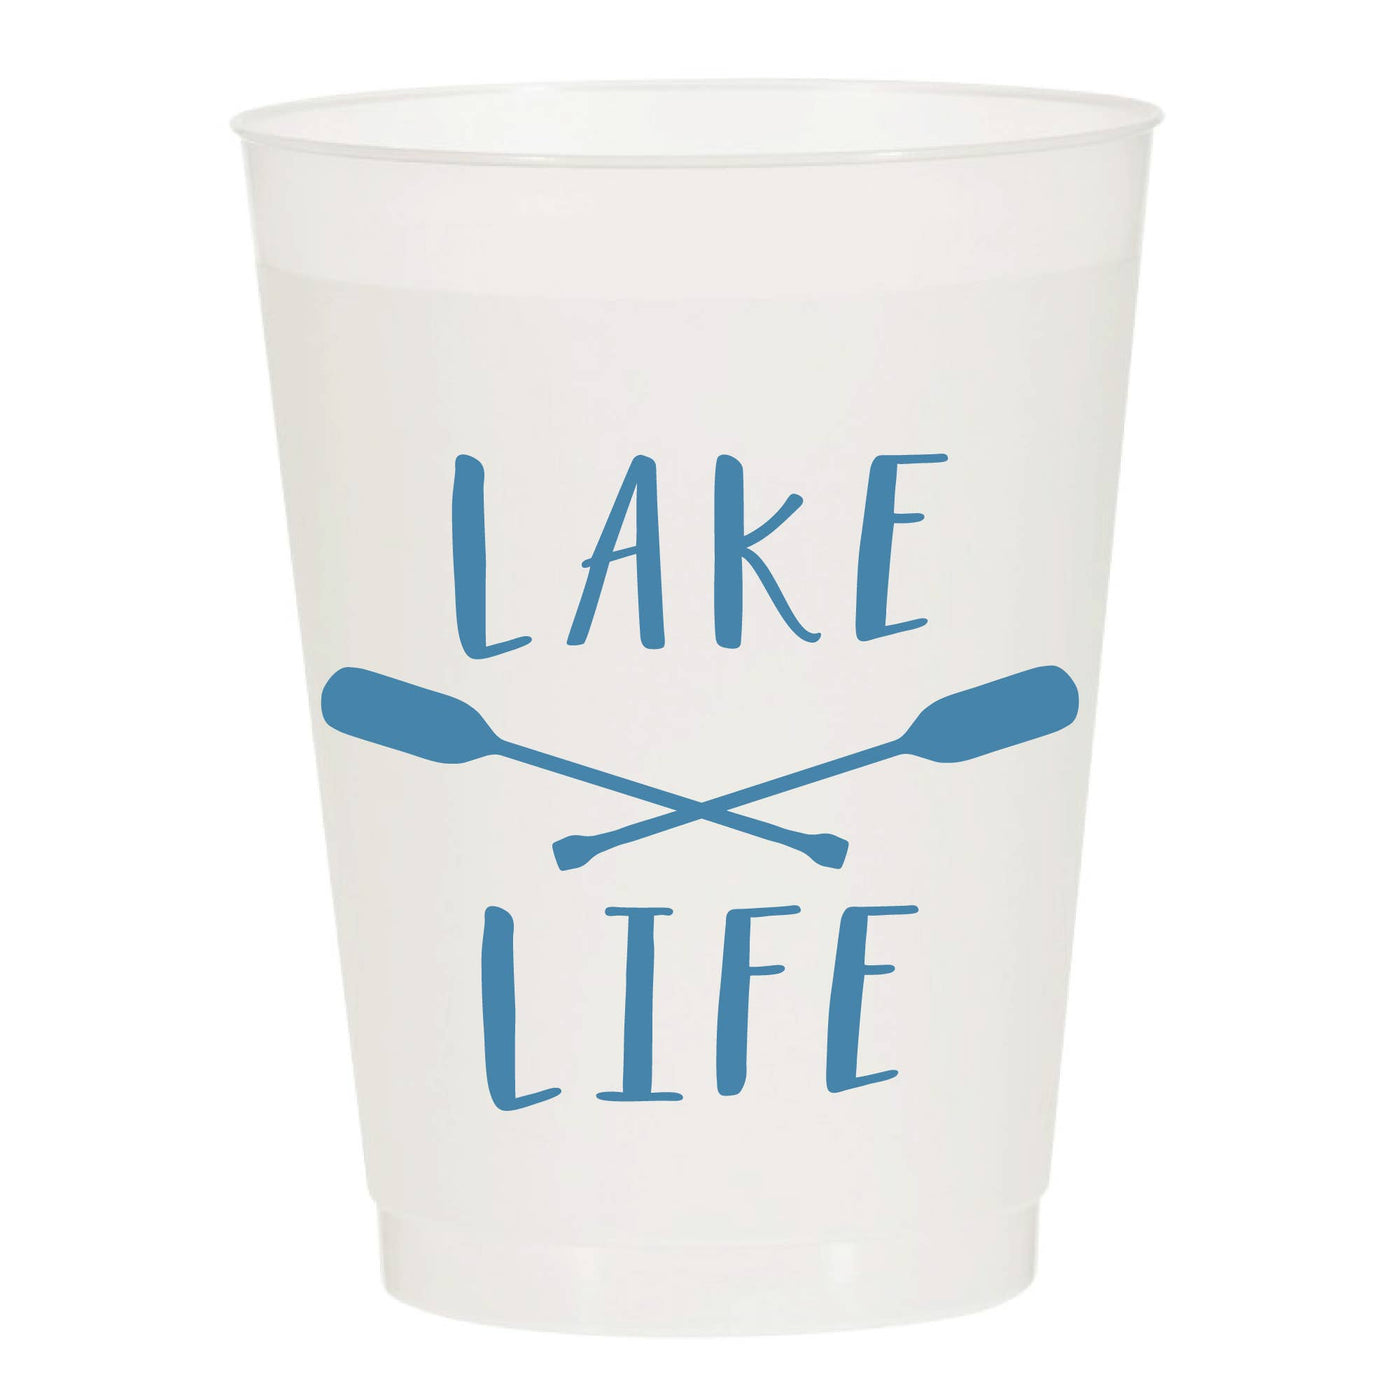 Lake Life Oar Reusable Vacation Home Cups - Set of 10 Cups